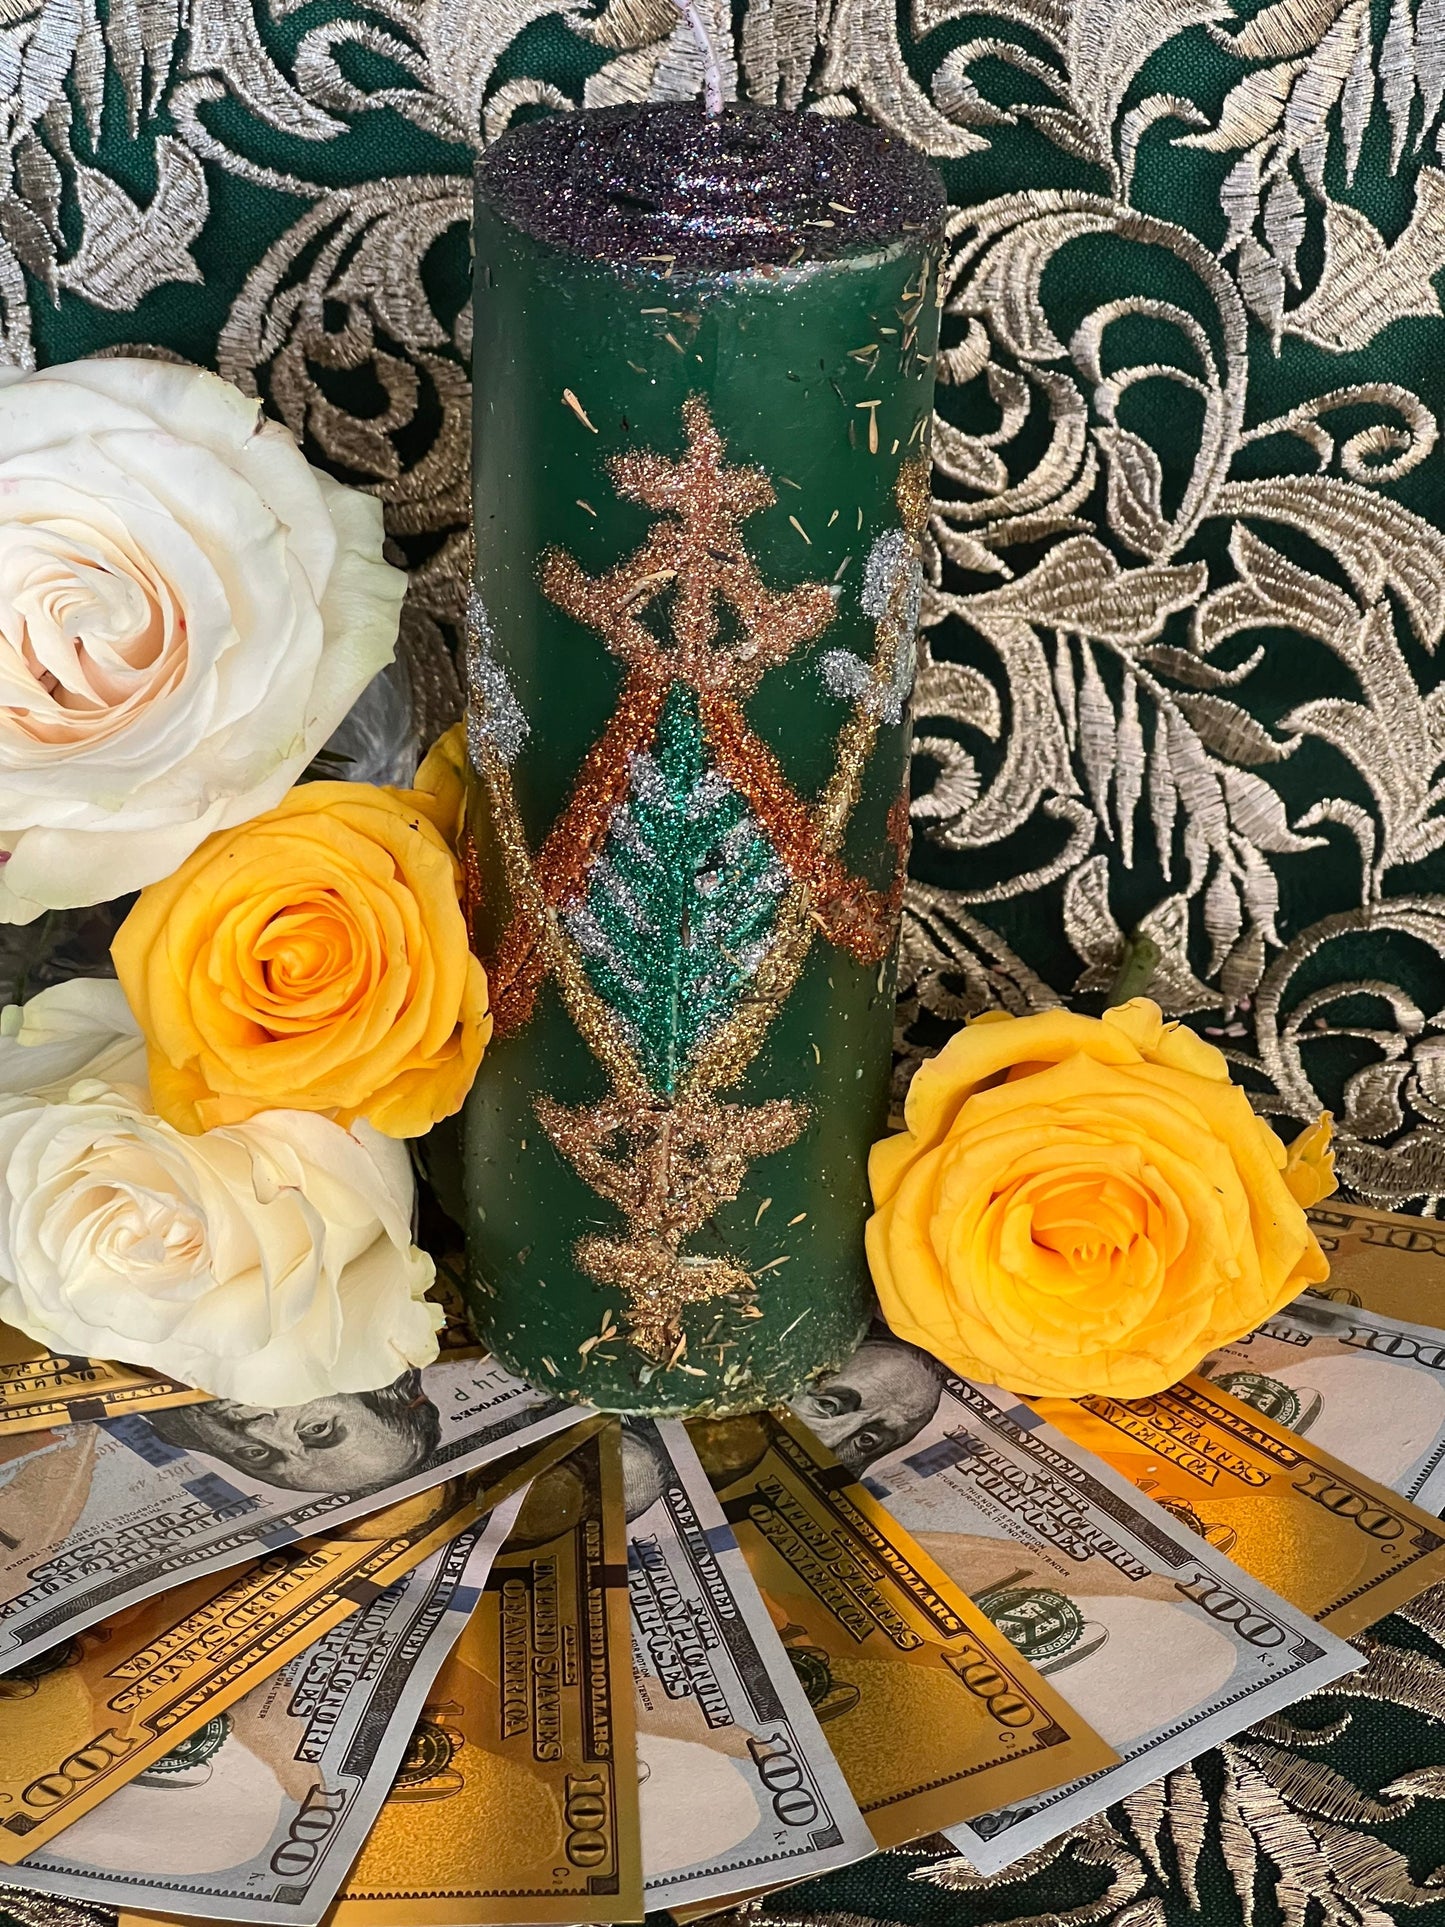 Ayizan Prosperity Hand Carved Candle + Money + Better Business + More Customers + Llame Cliente + Fixed